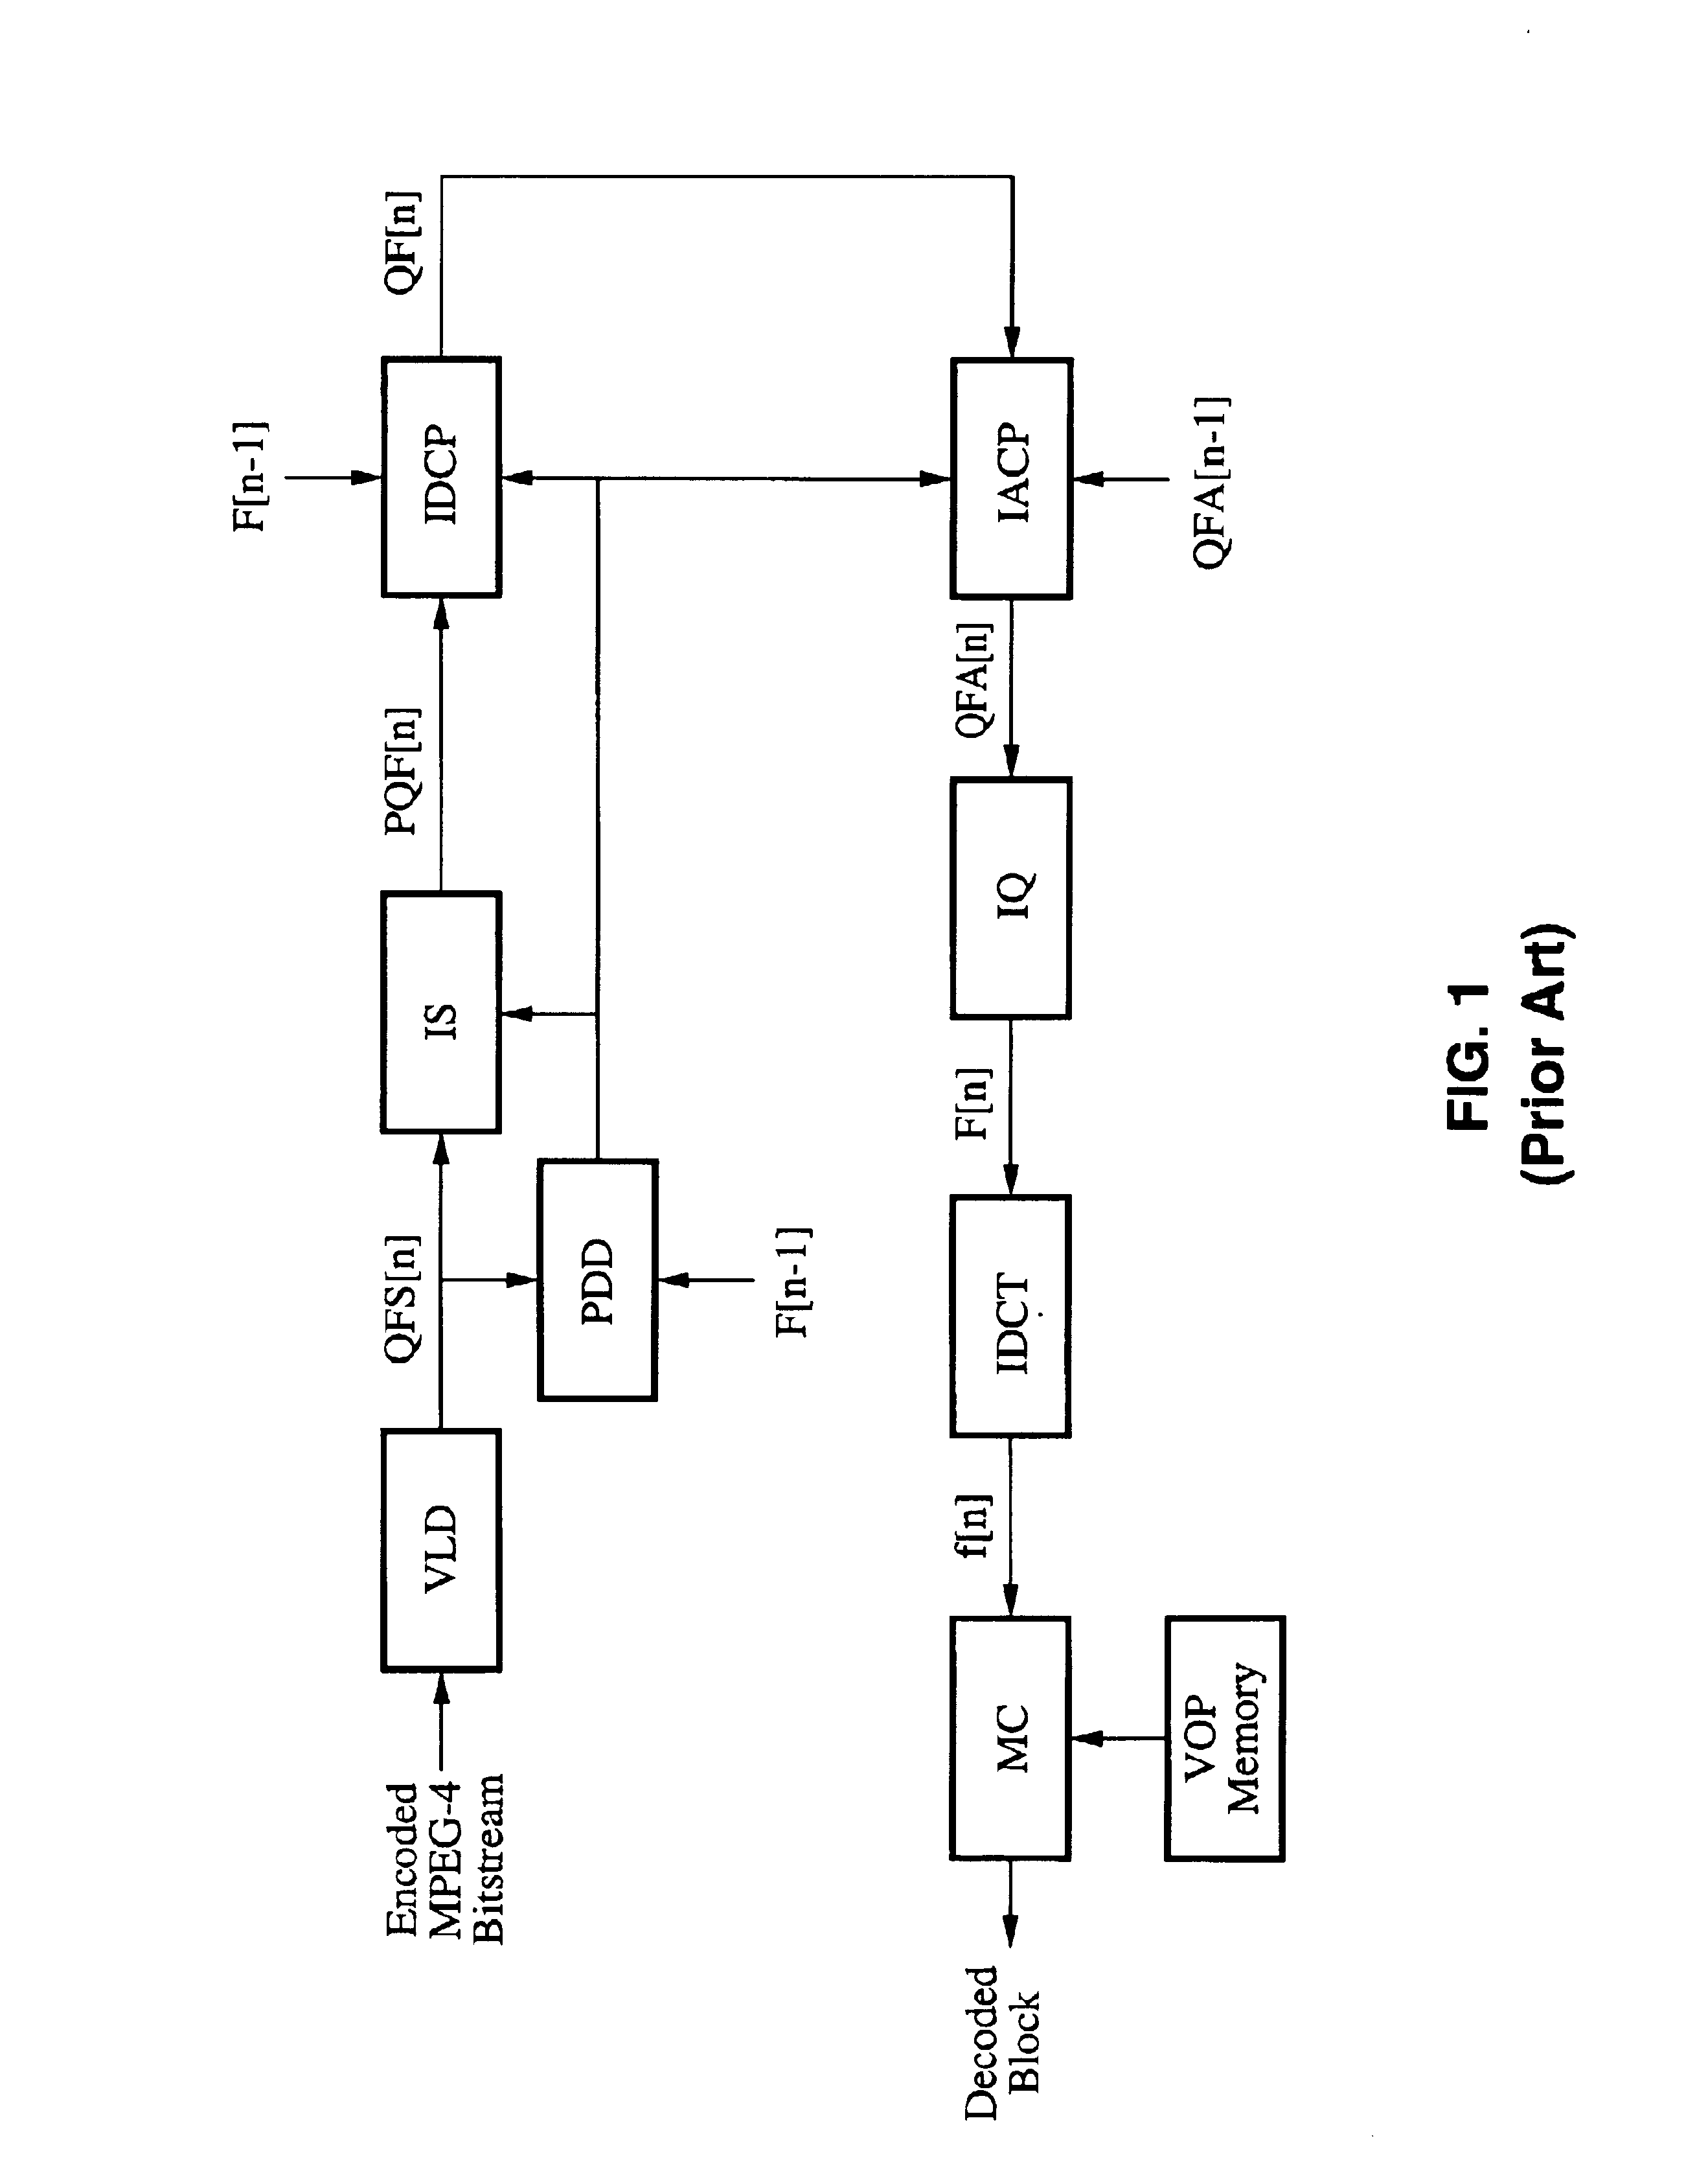 Method of real time MPEG-4 texture decoding for a multiprocessor environment